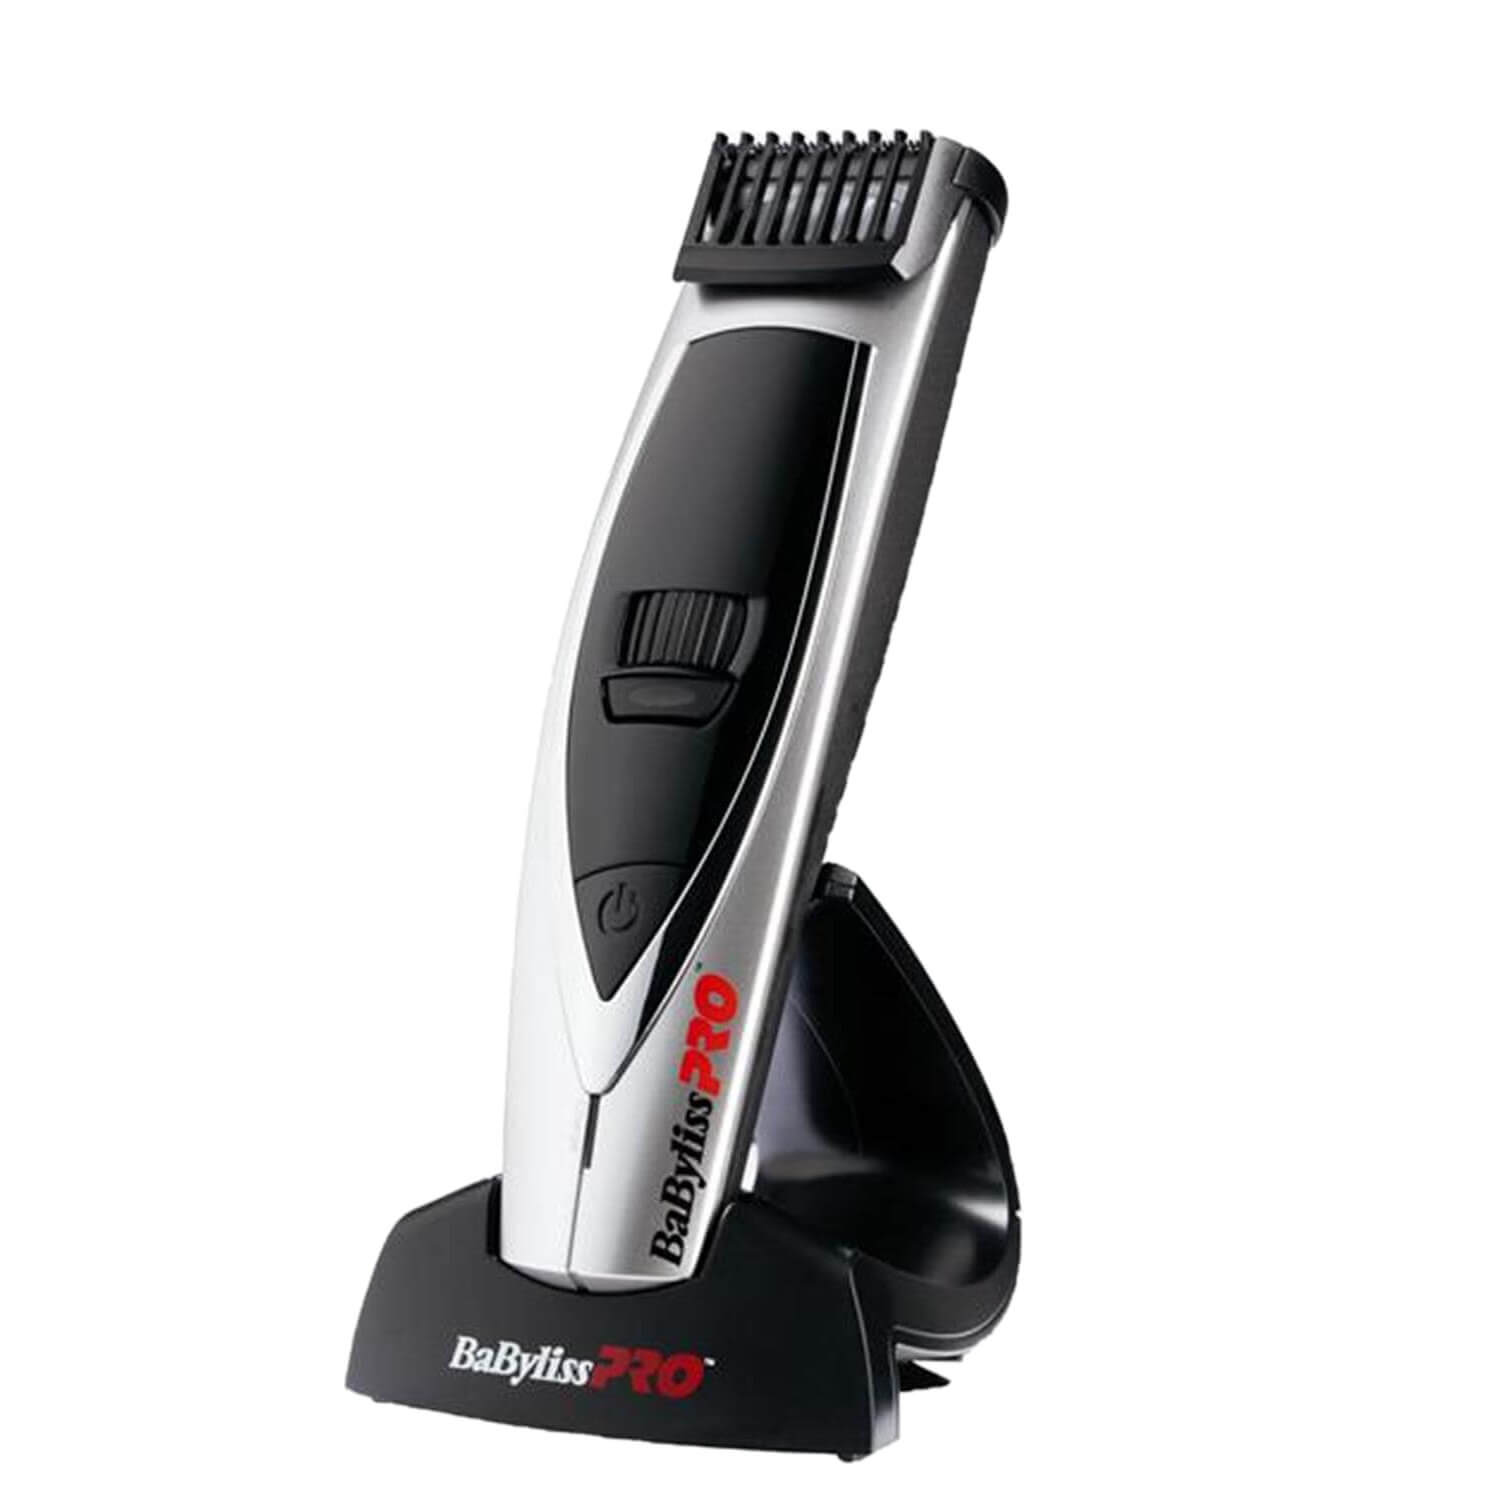 BaByliss-Pro-Super-Beard-Trimmer-FX775E-on-stand-angle